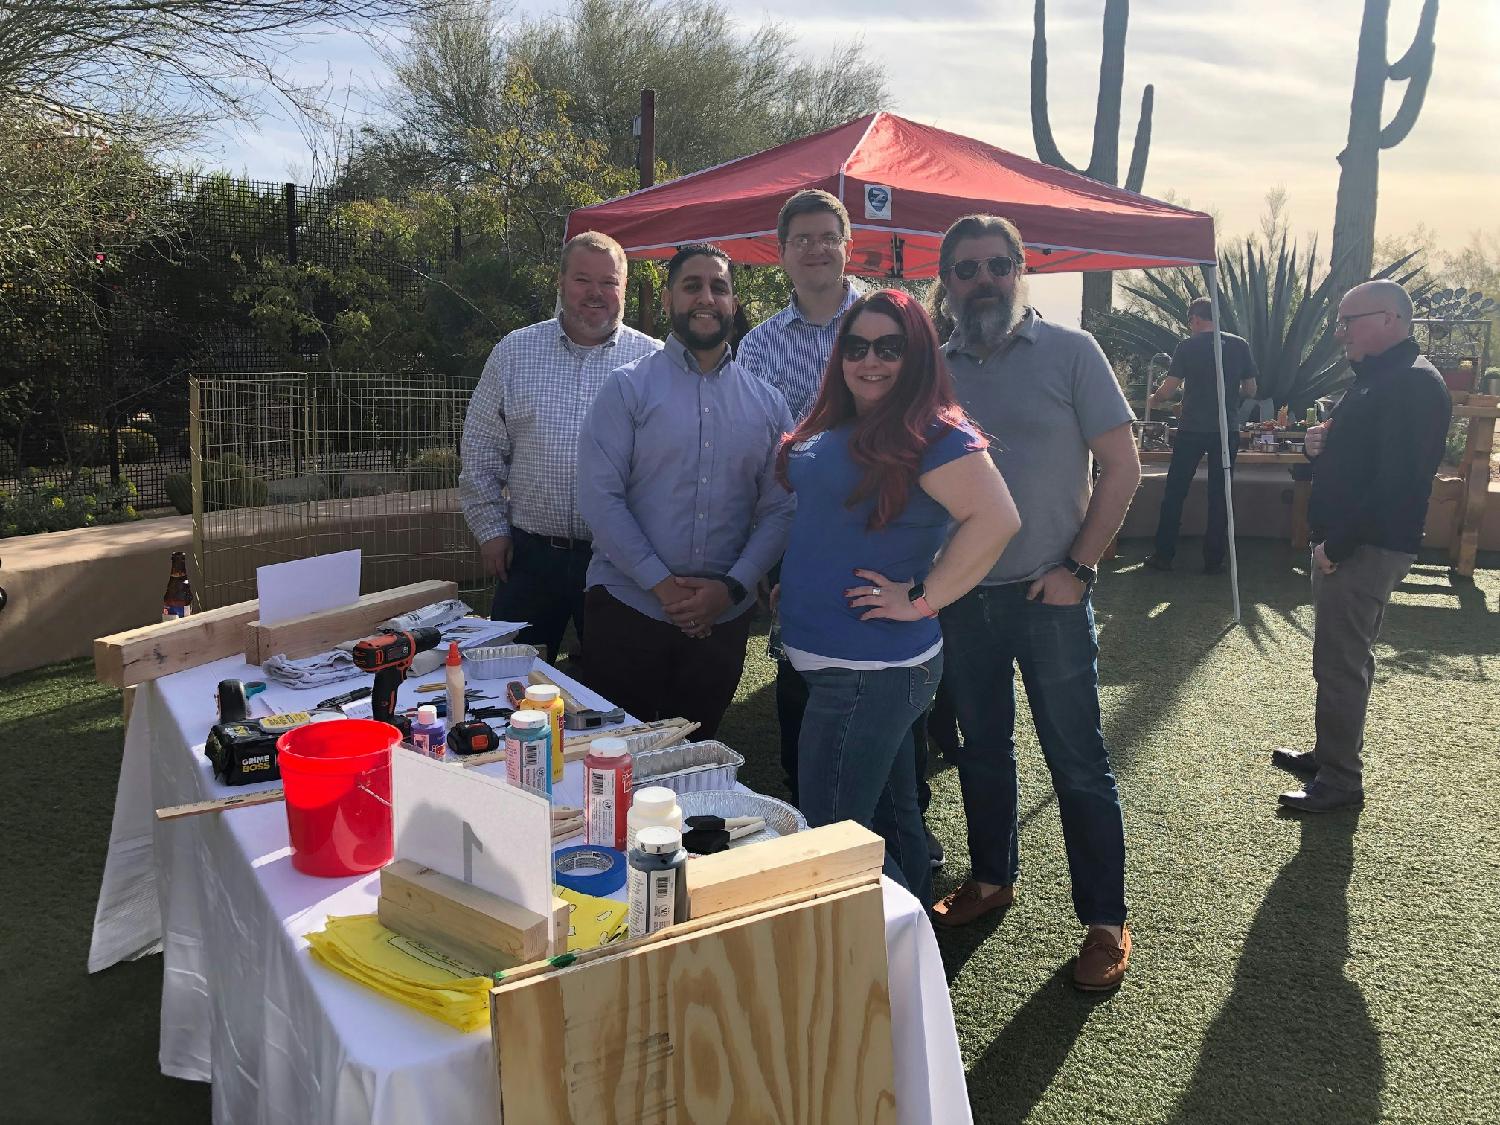 Our teams busy building dog houses for the Fetch foundation in Scottsdale, AZ at Sales Kick Off